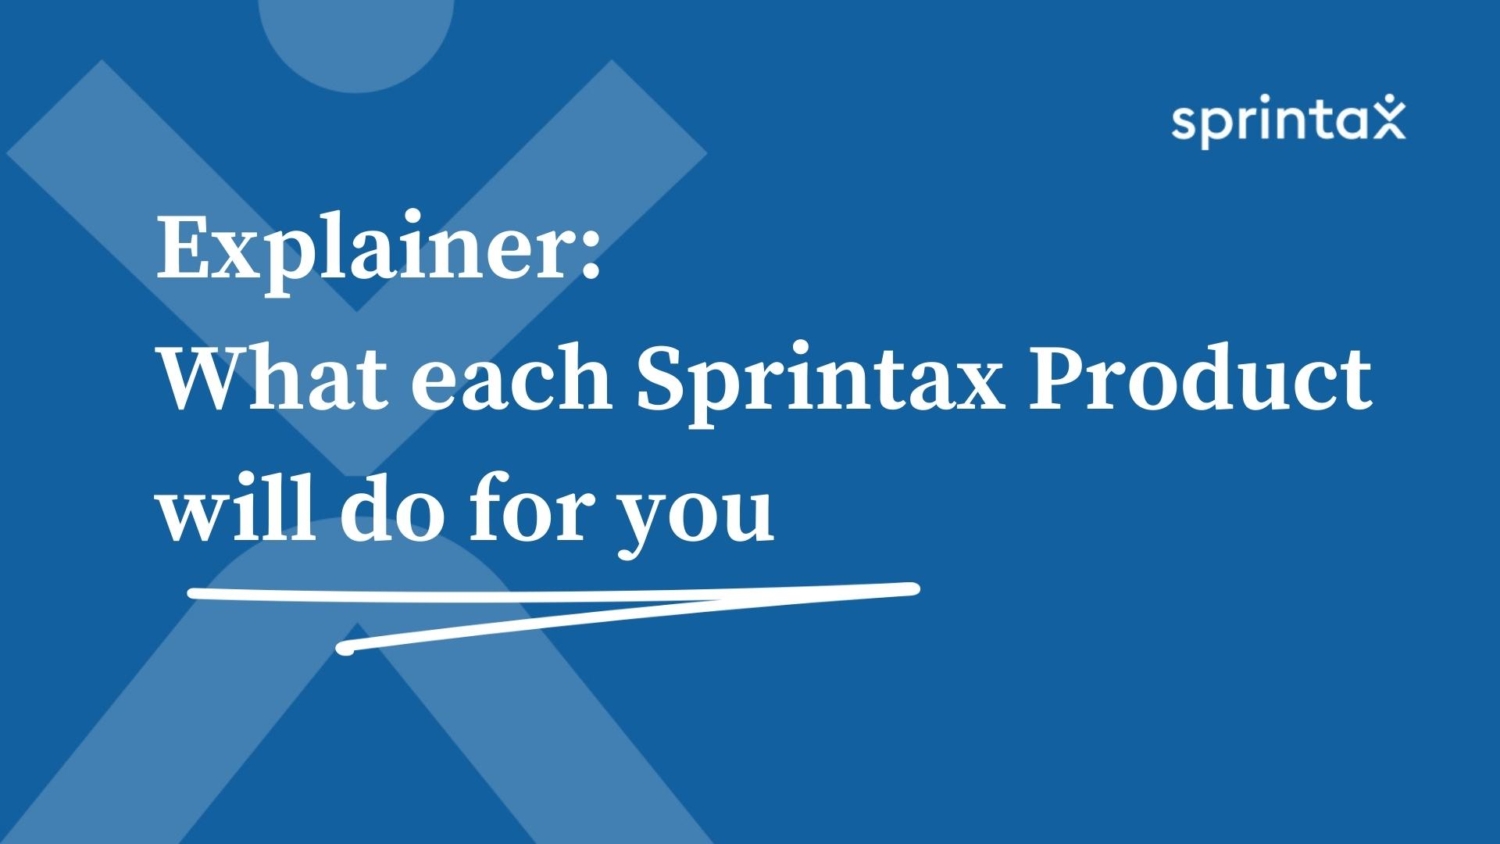 What do Sprintax products do